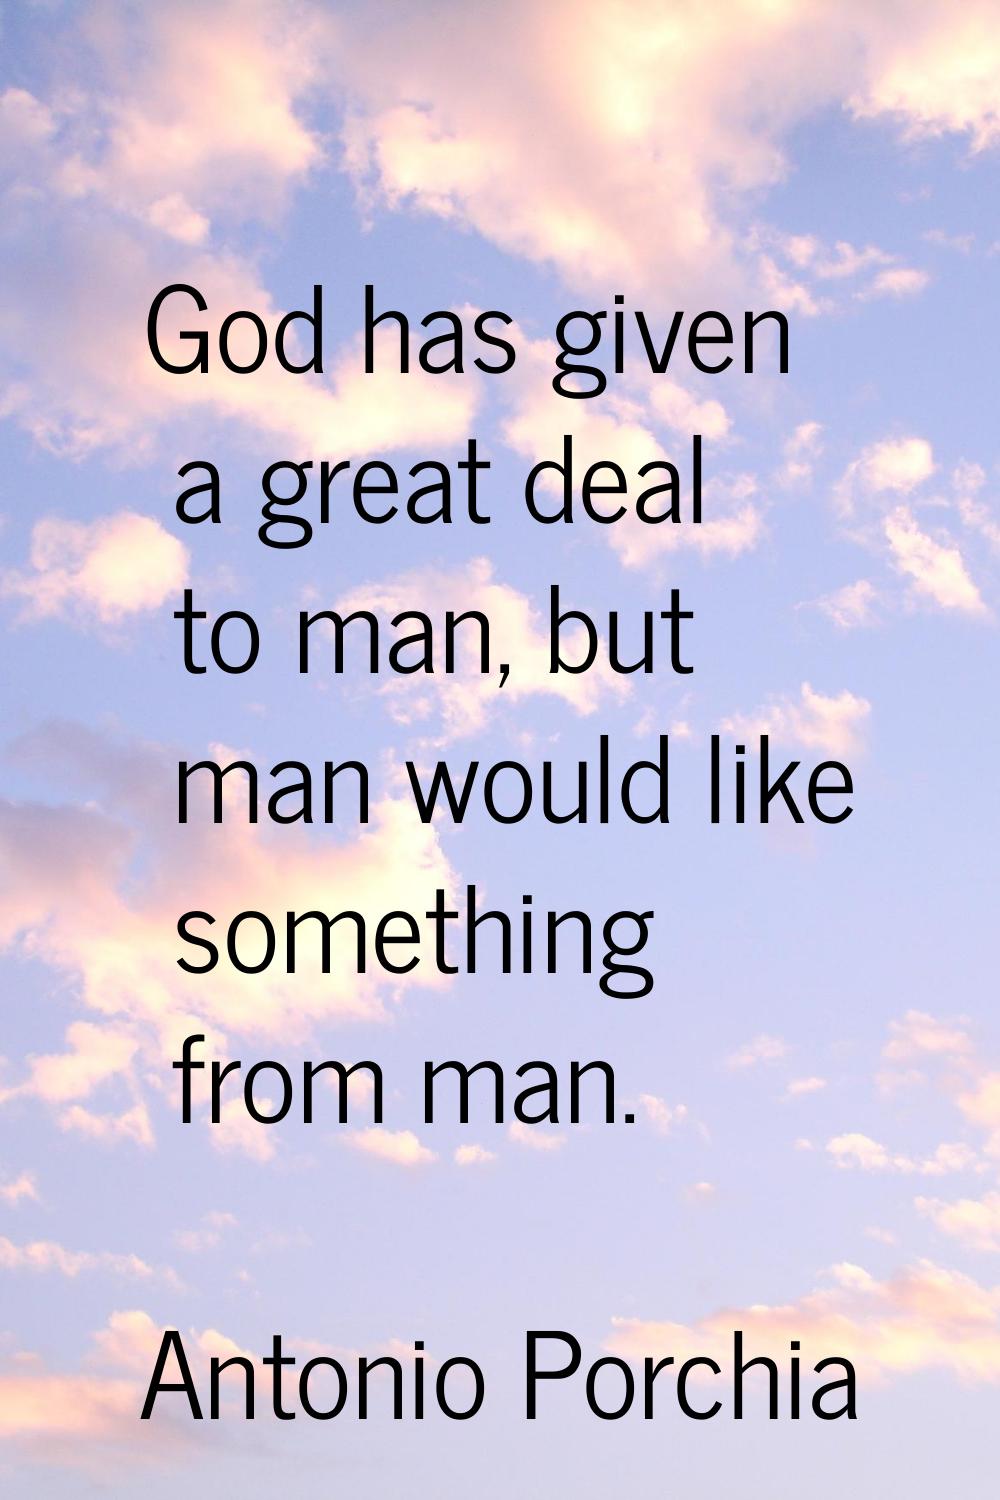 God has given a great deal to man, but man would like something from man.